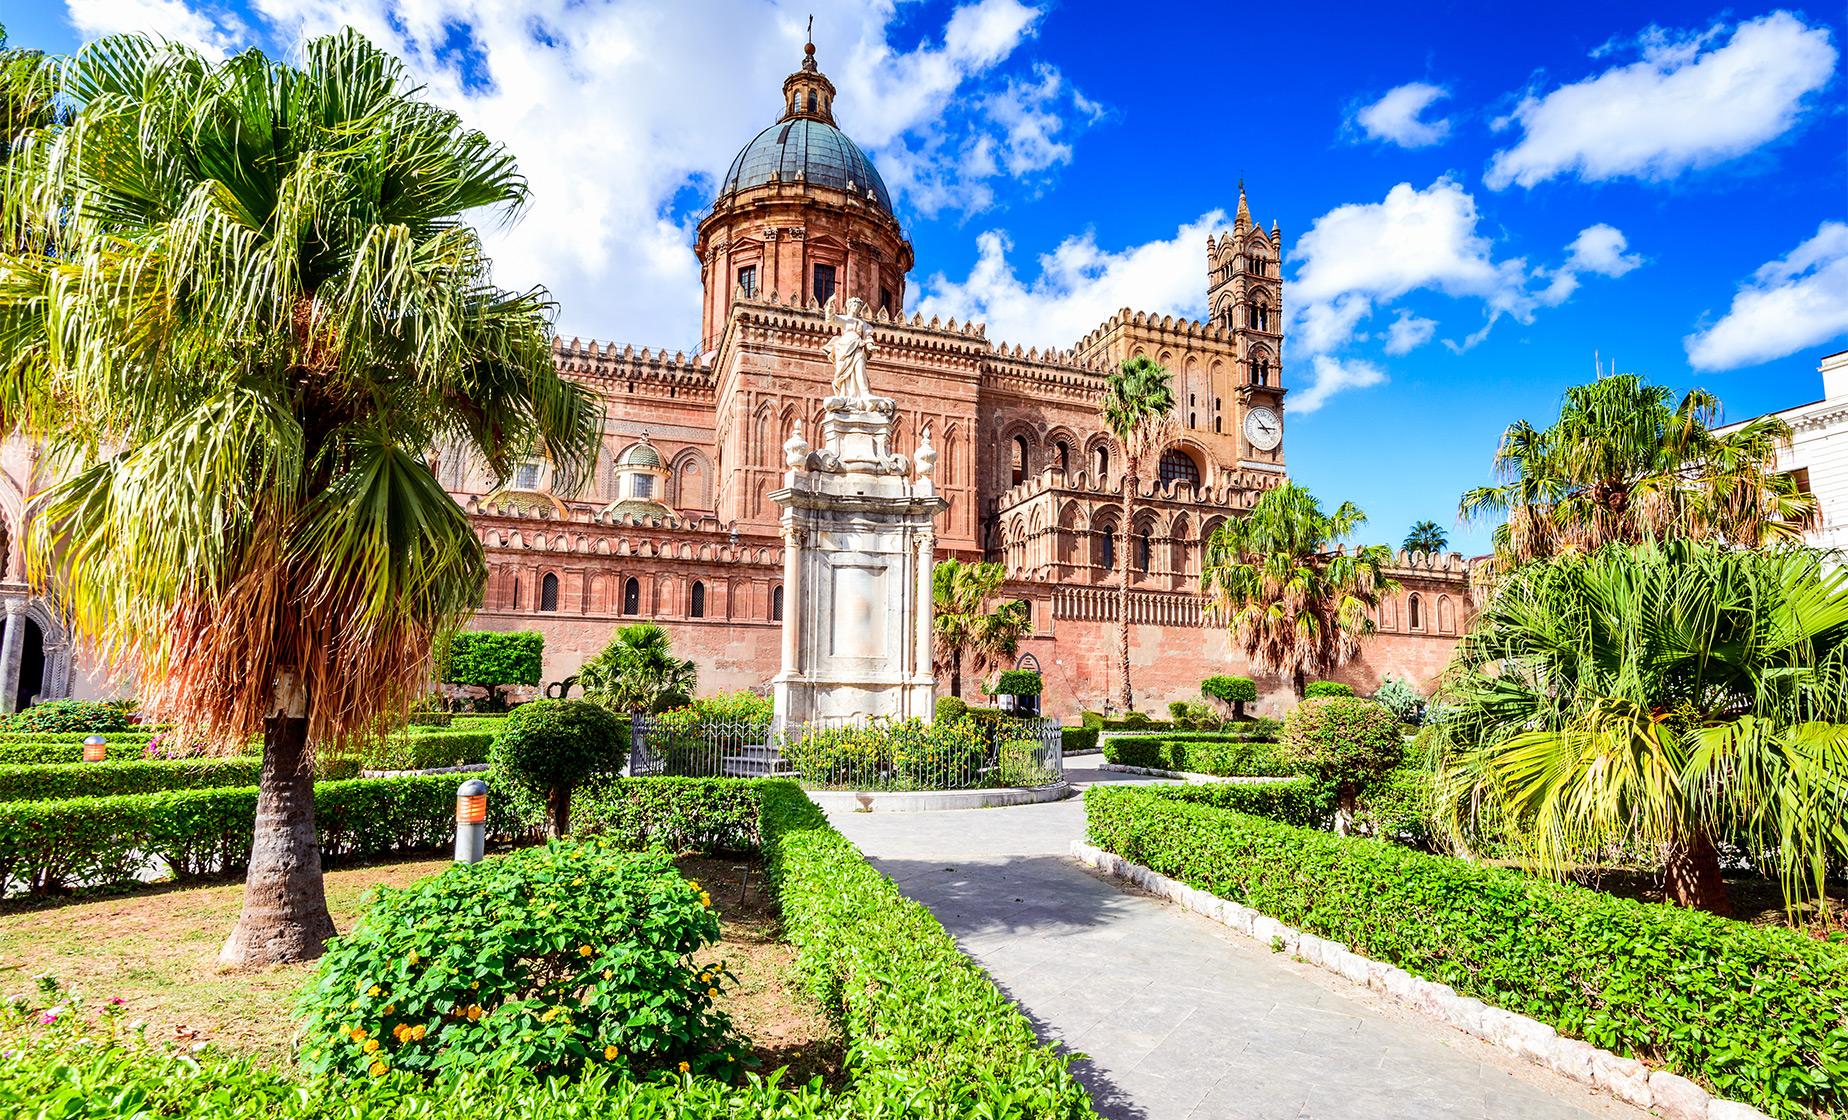 Private Churches of Palermo Walking Tour